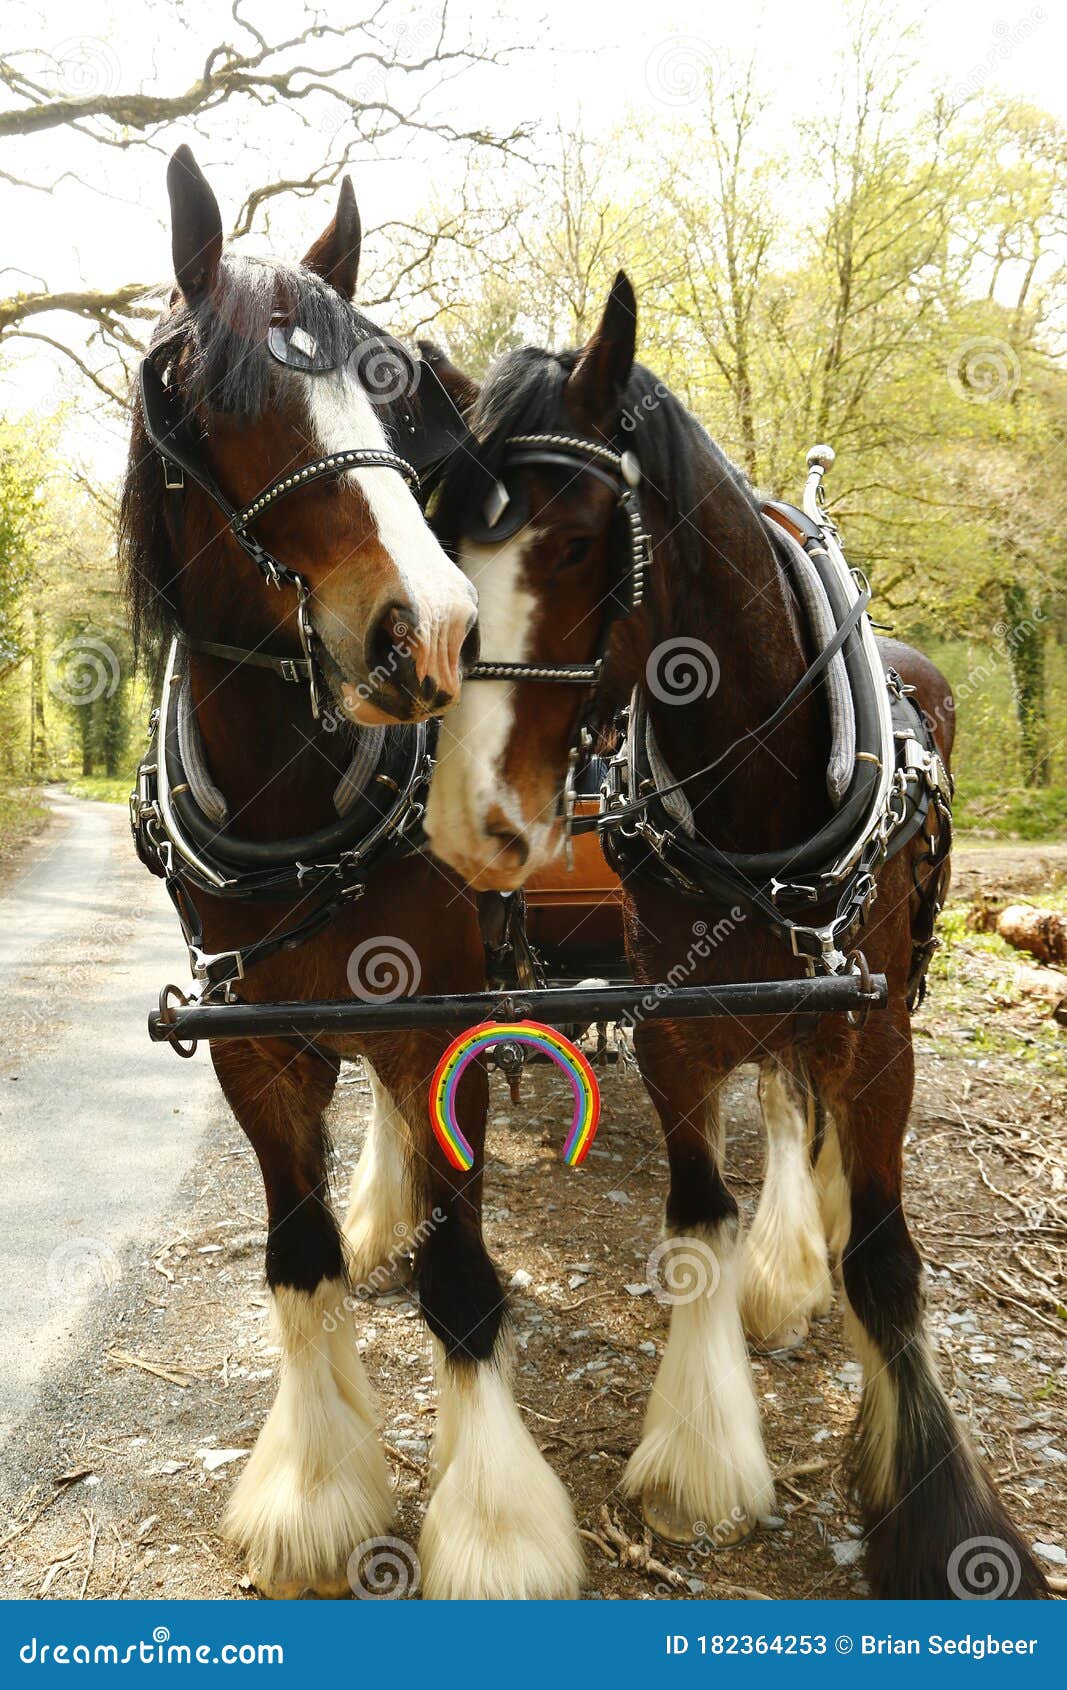 pair of shire horses harnessed together with the nhs rainbow colours on a horse shoe attached to their harness